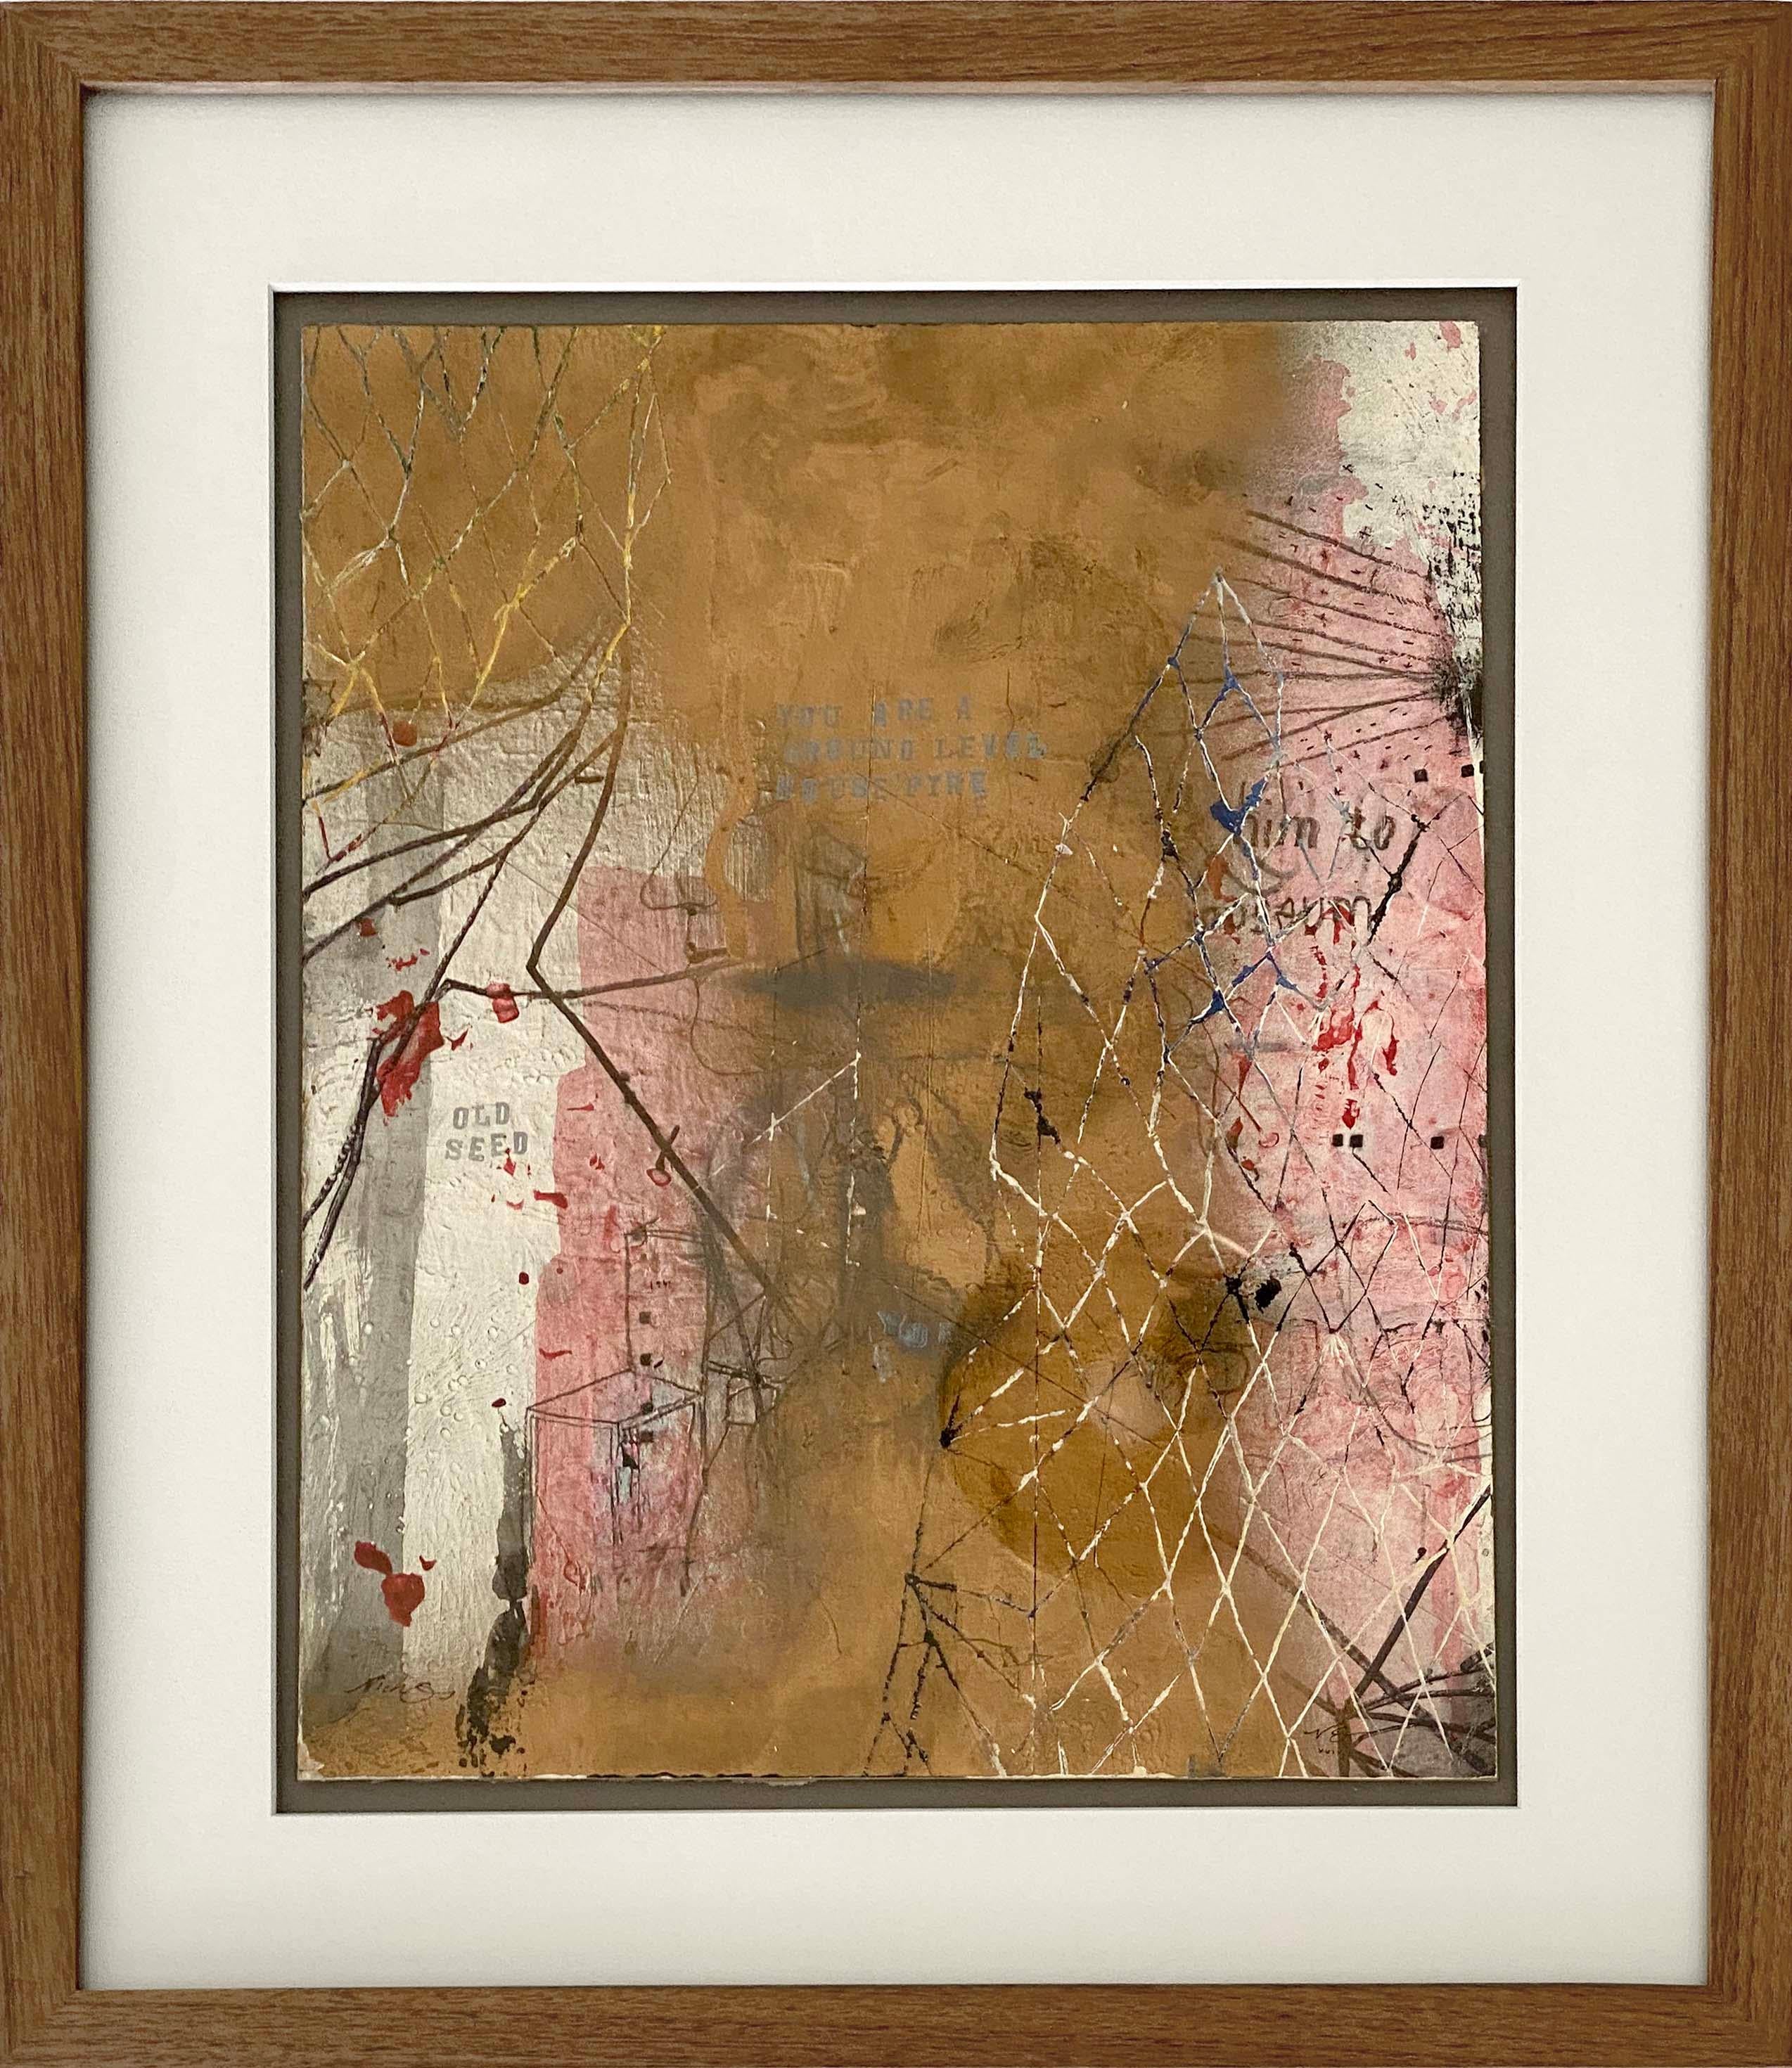 "Old Seed" (Abstract, Contemporary, Pink, White, Custom Framed, Gallery Glass)